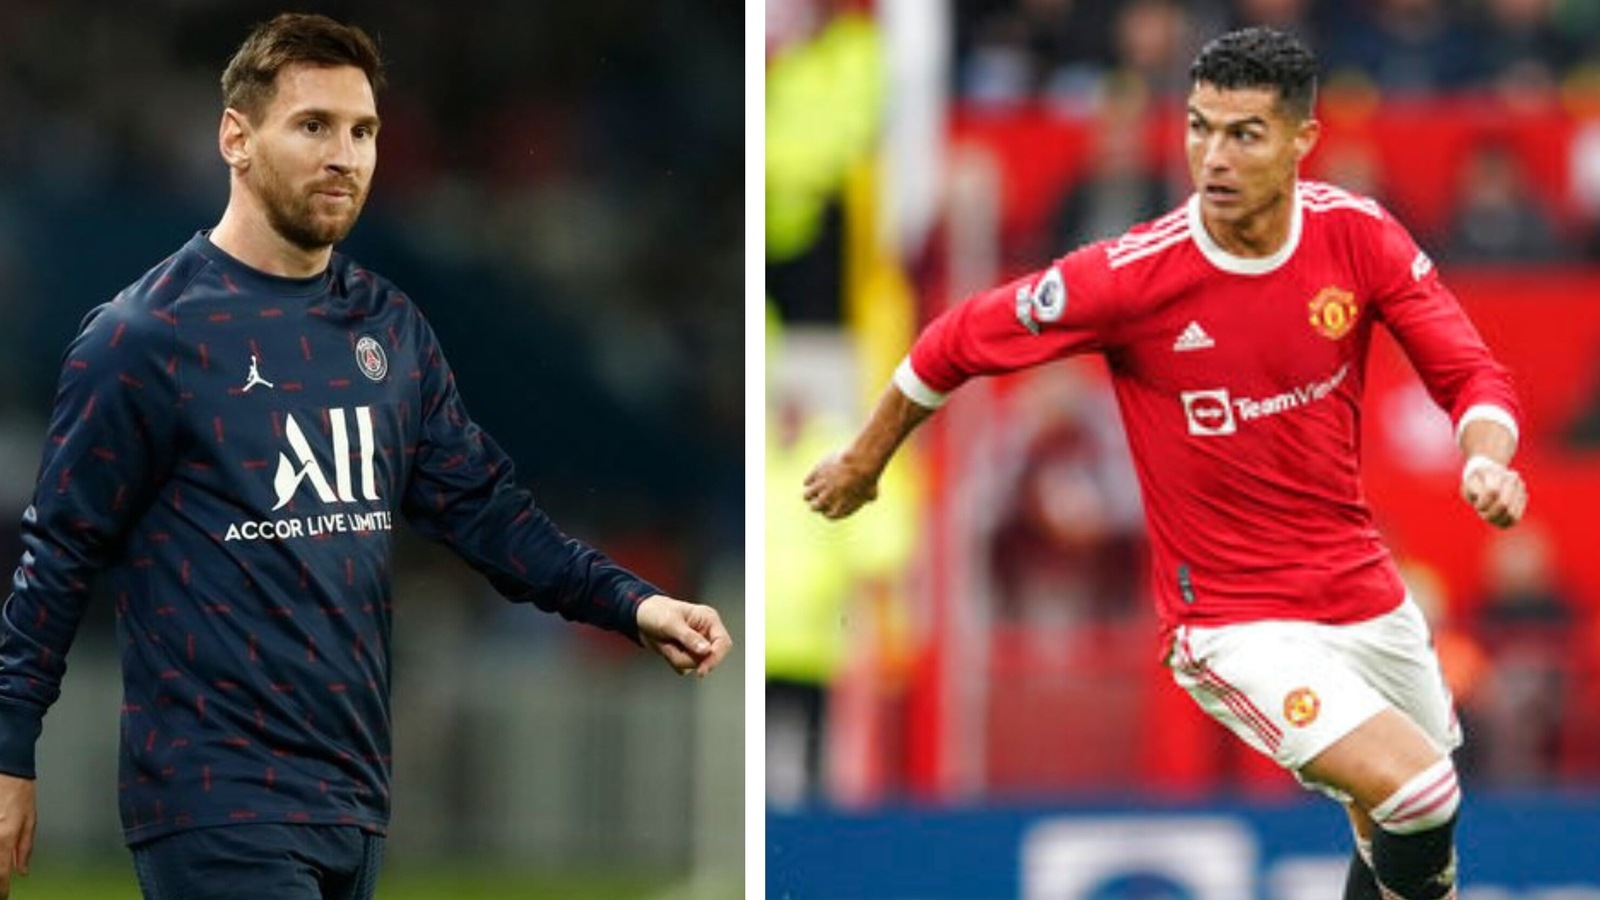 Messi threatened to leave PSG if Ligue 1 giants sign Ronaldo from Manchester United – Report